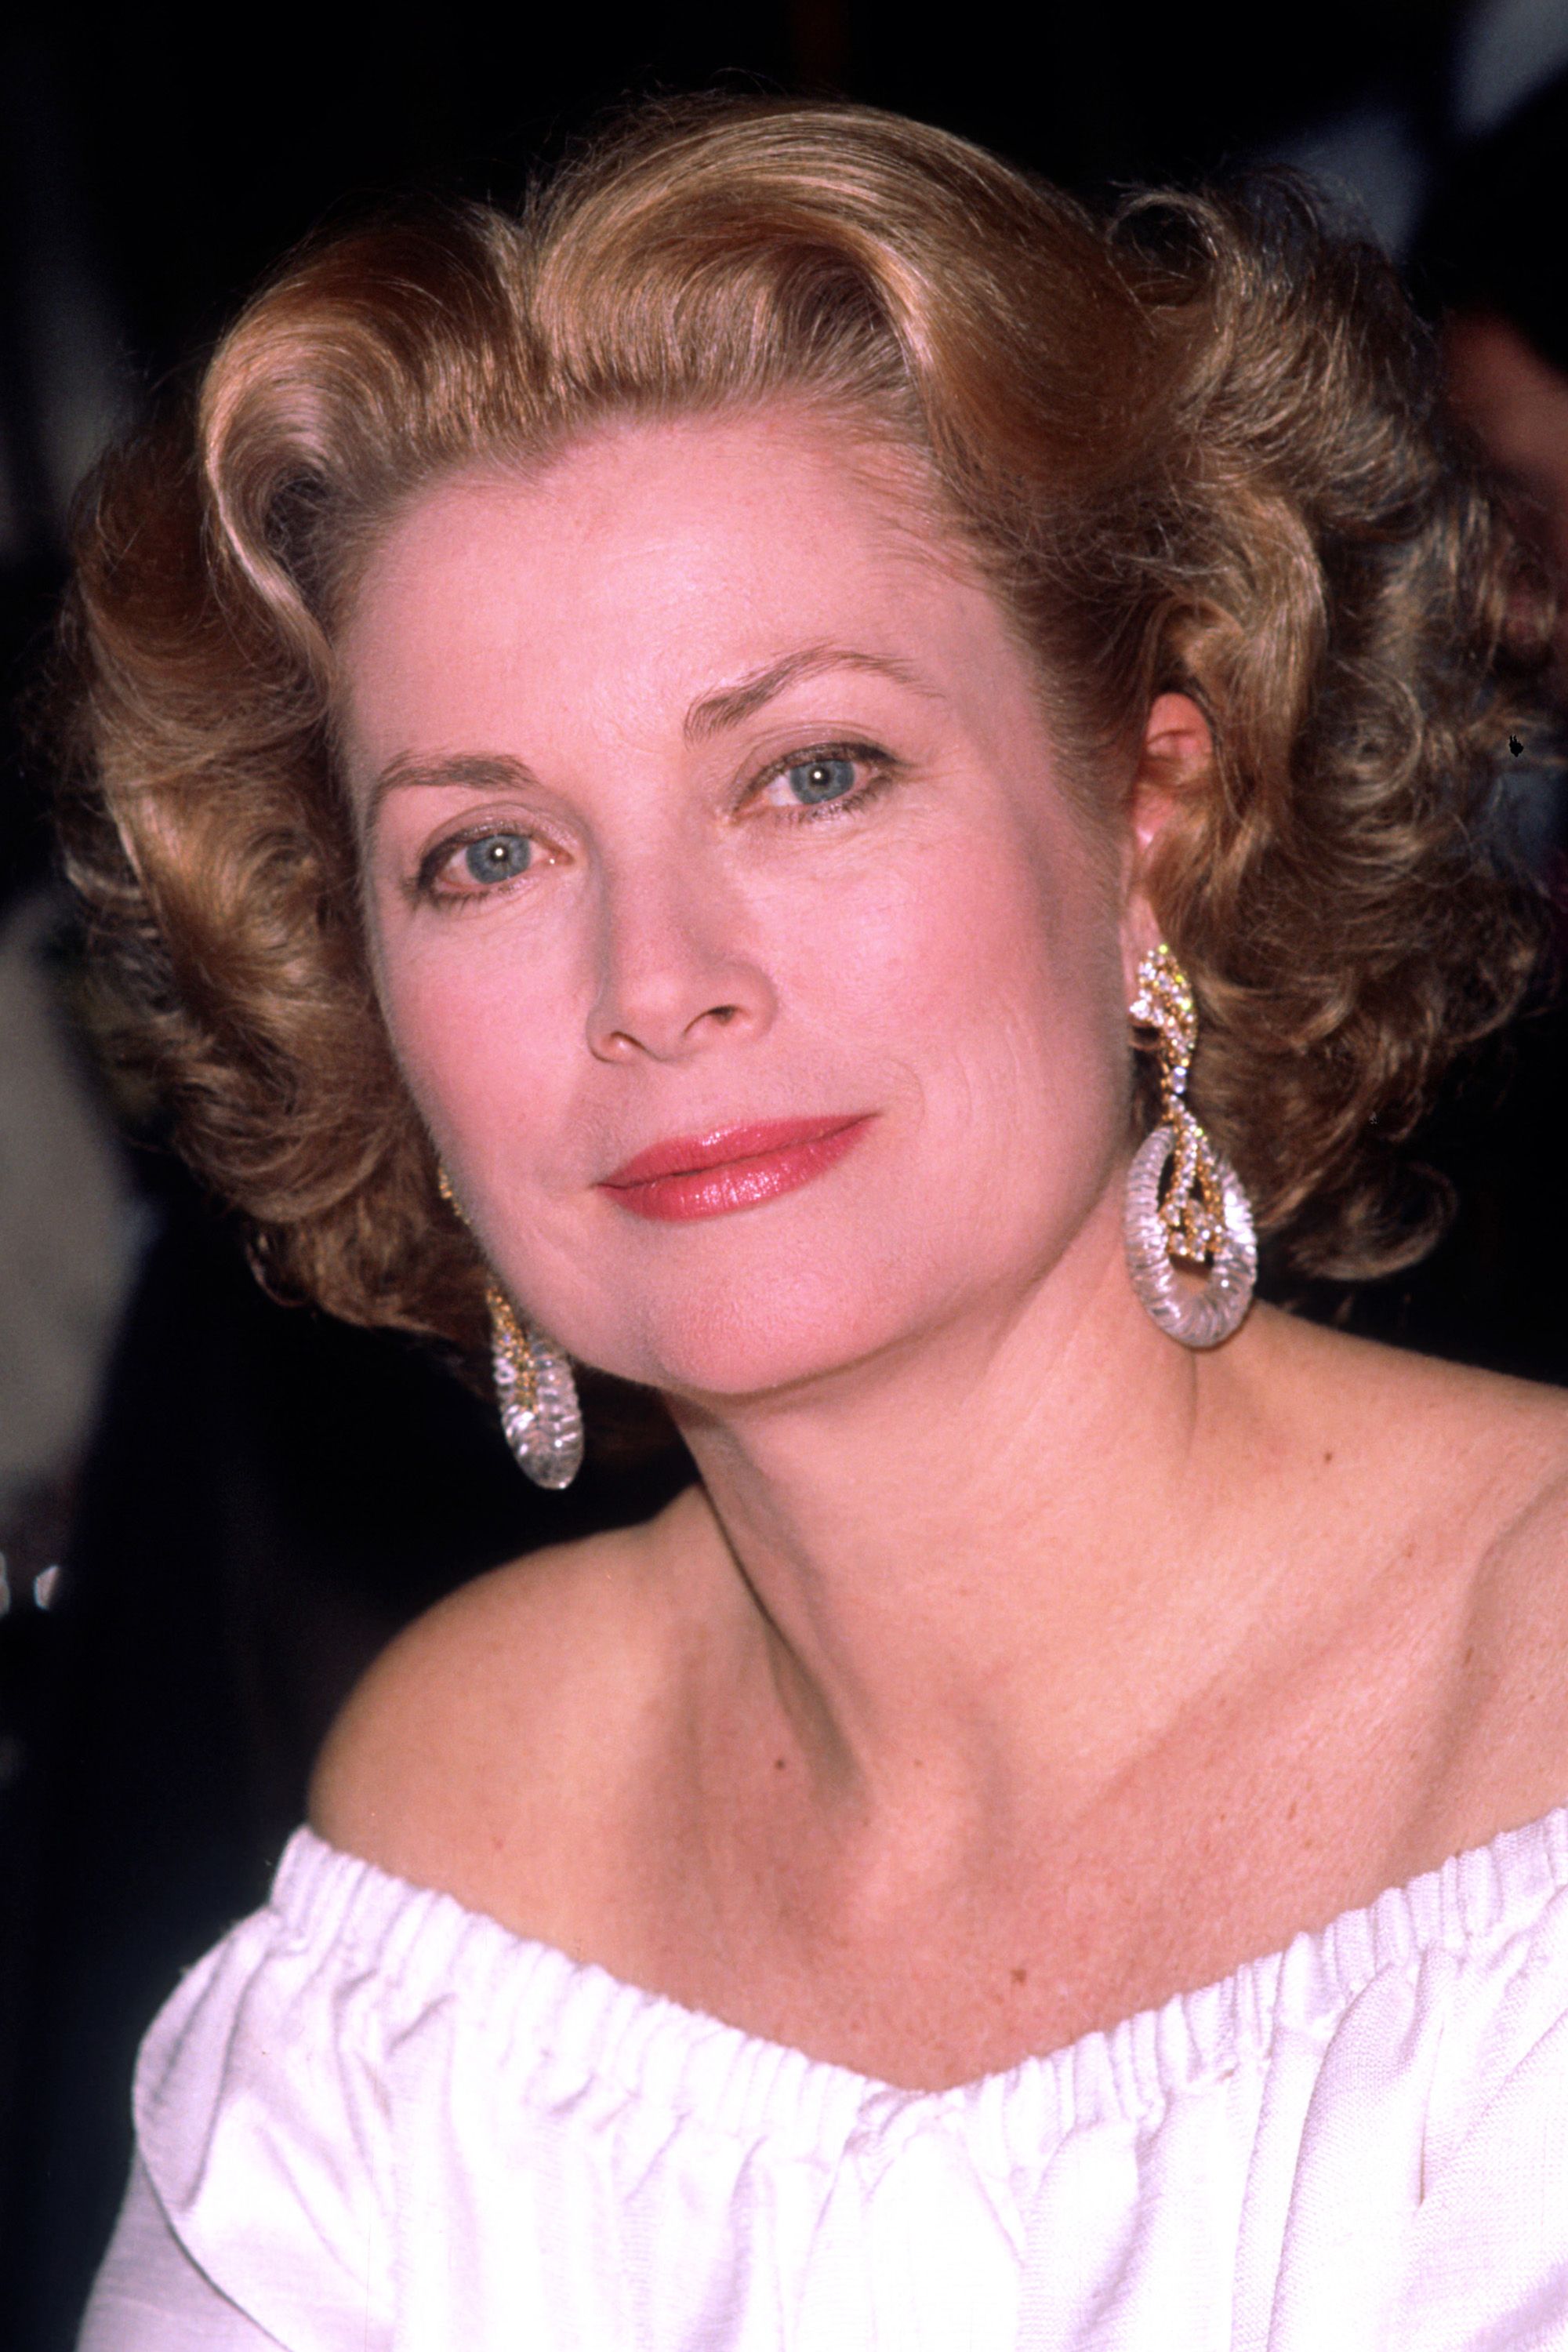 hbz-grace-kelly-1979-gettyimages-152073758-1530201470.jpg